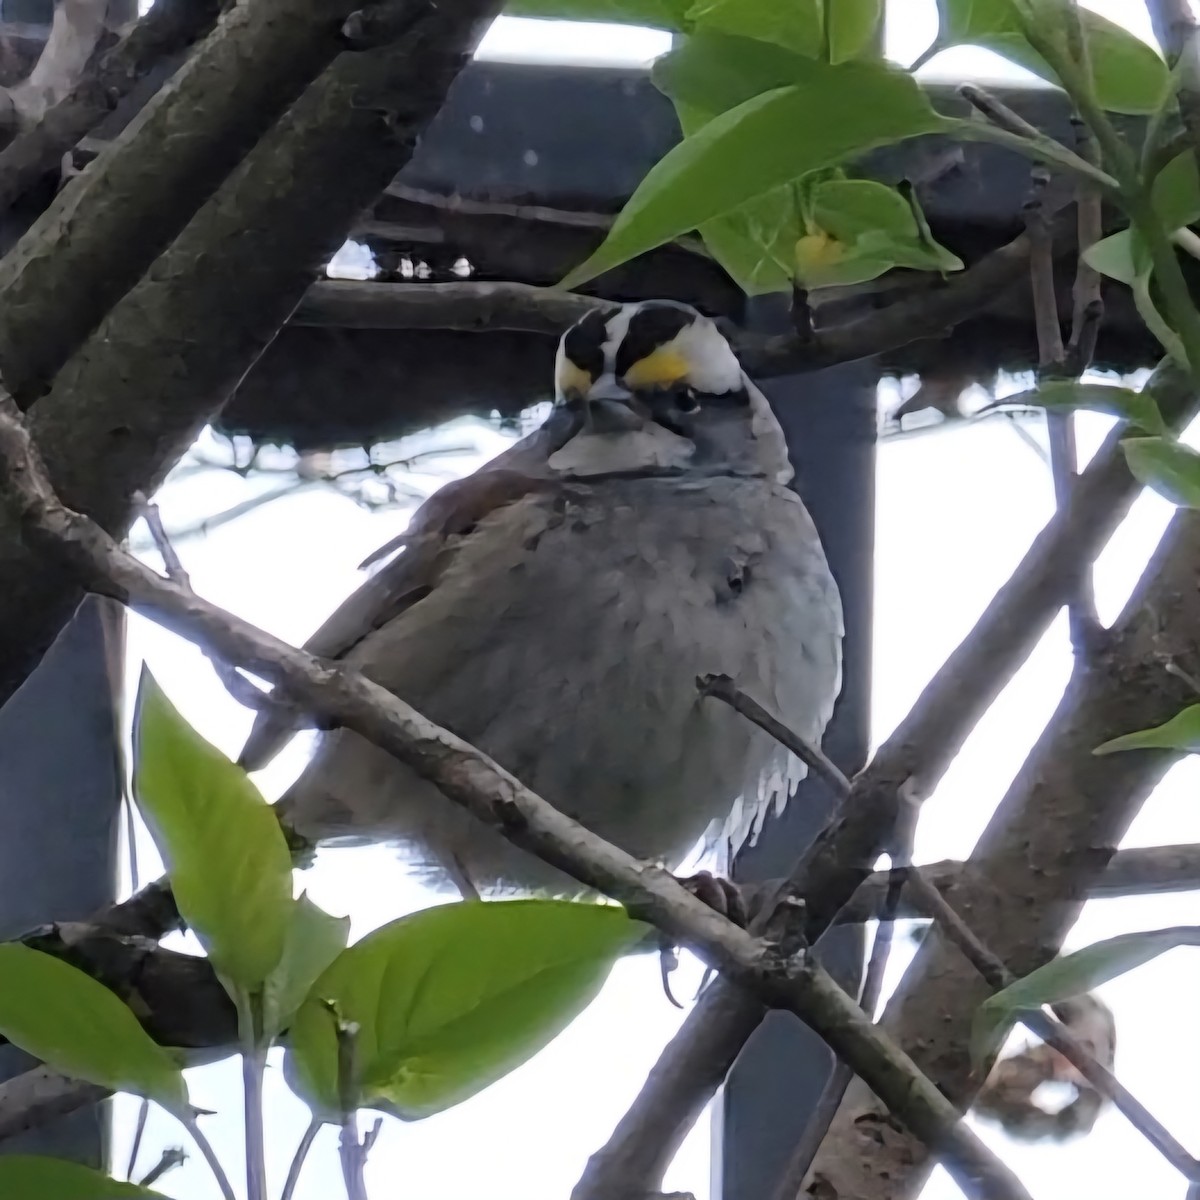 White-throated Sparrow - Dominic DeLaca-Wauer